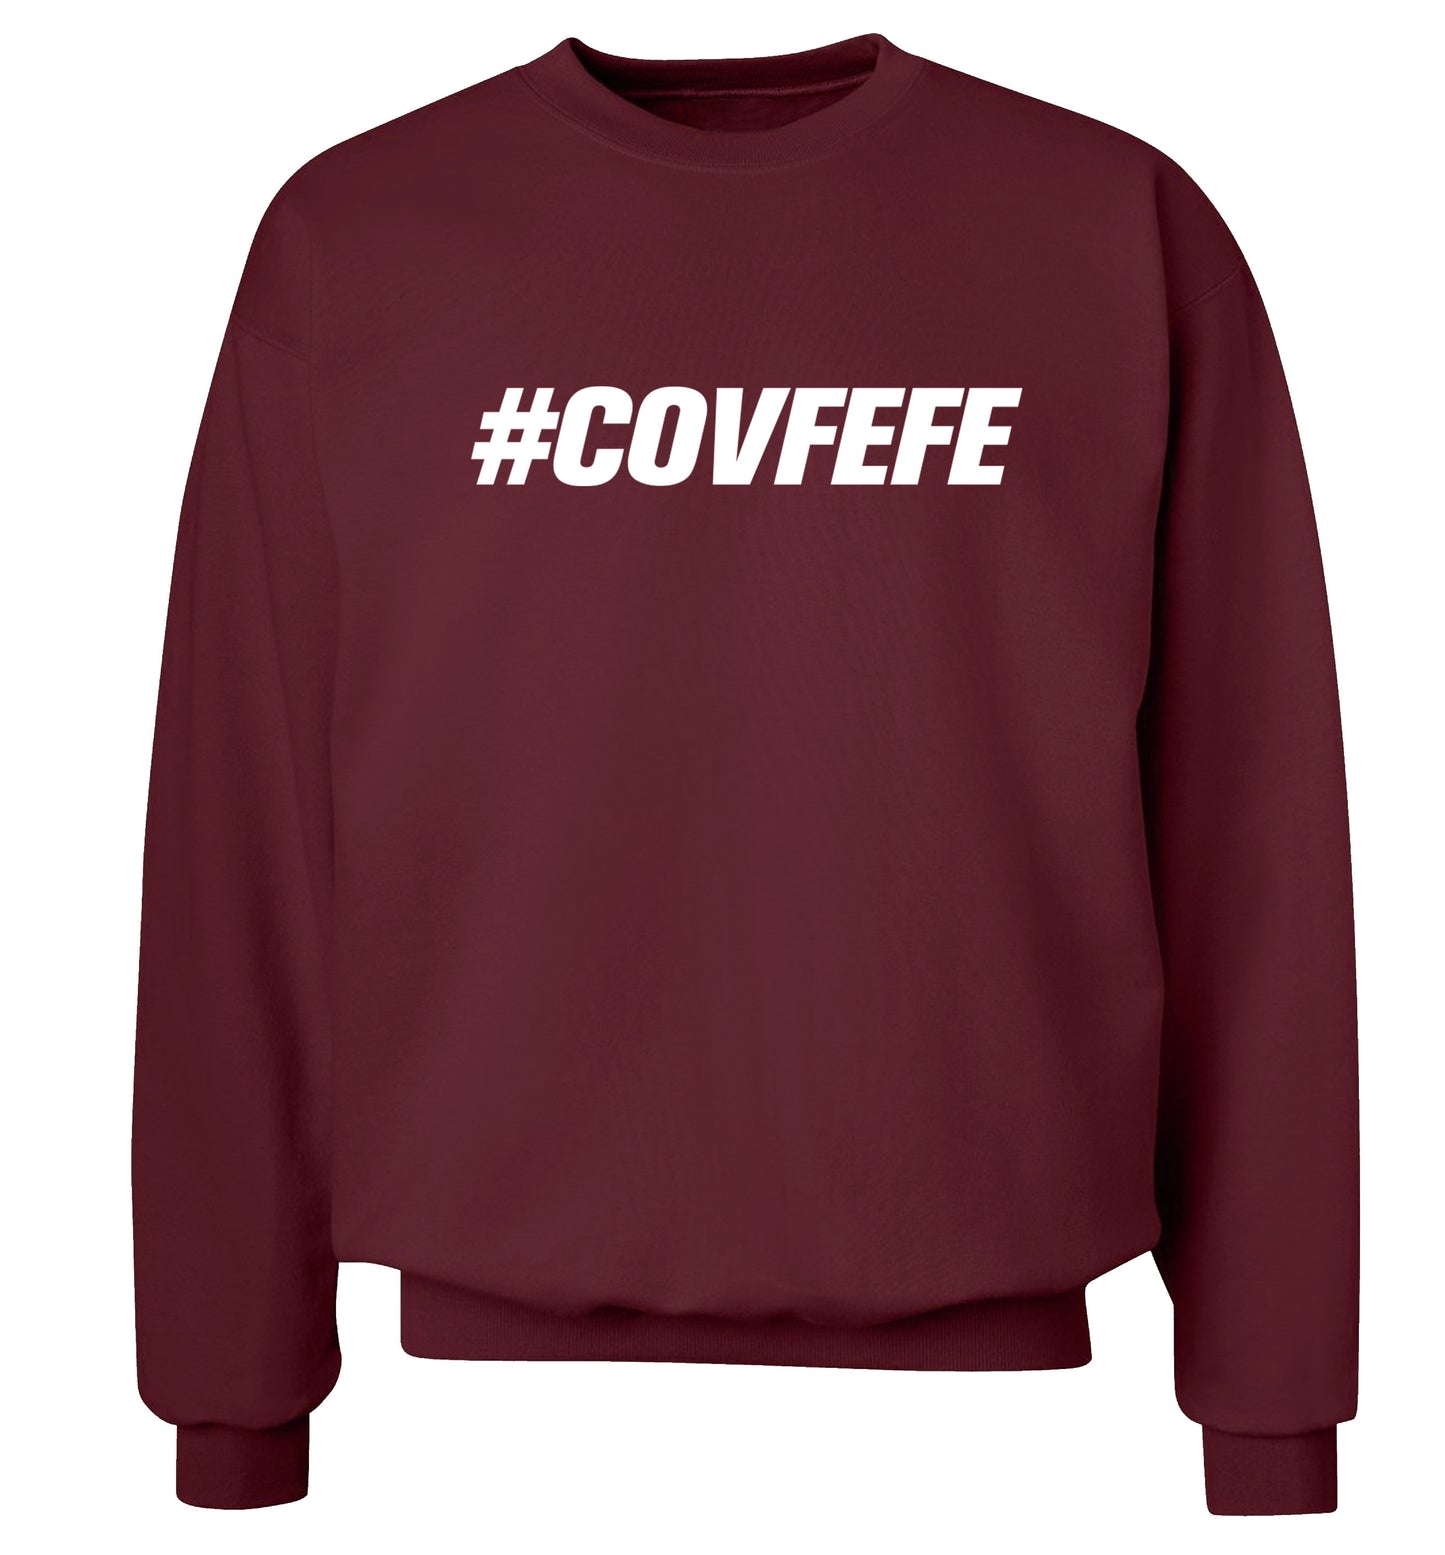 #covfefe Adult's unisex maroon Sweater 2XL